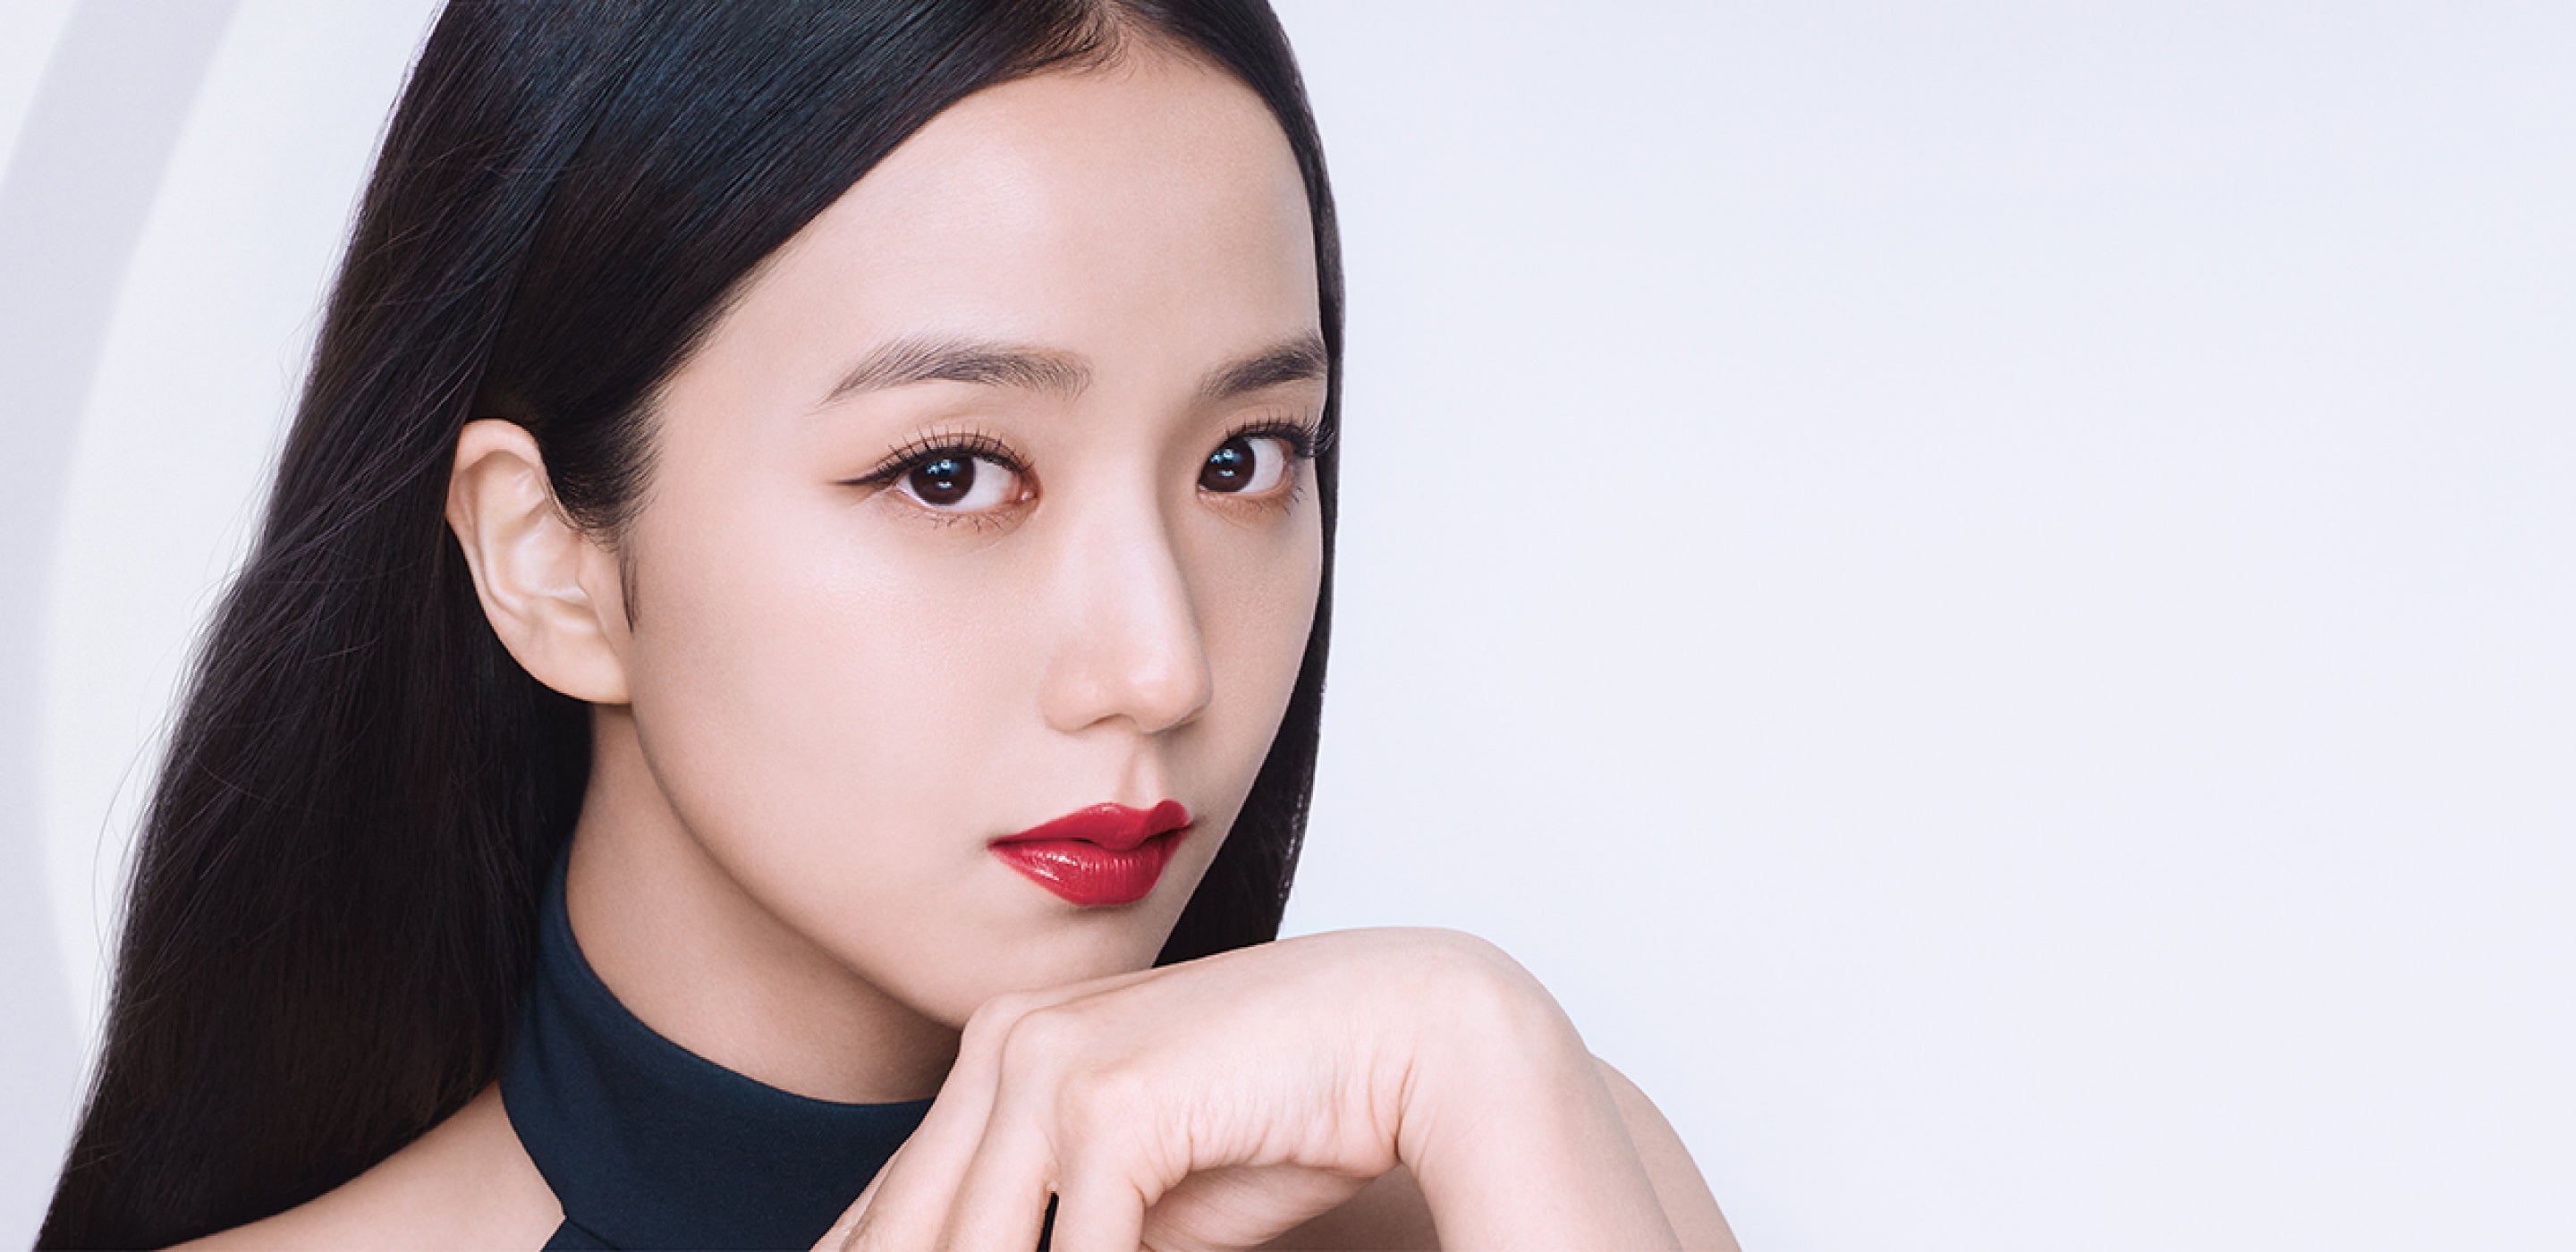 Blackpinks Jisoo Is the New Face of Diors Addict Lipstick Collection   Tatler Asia